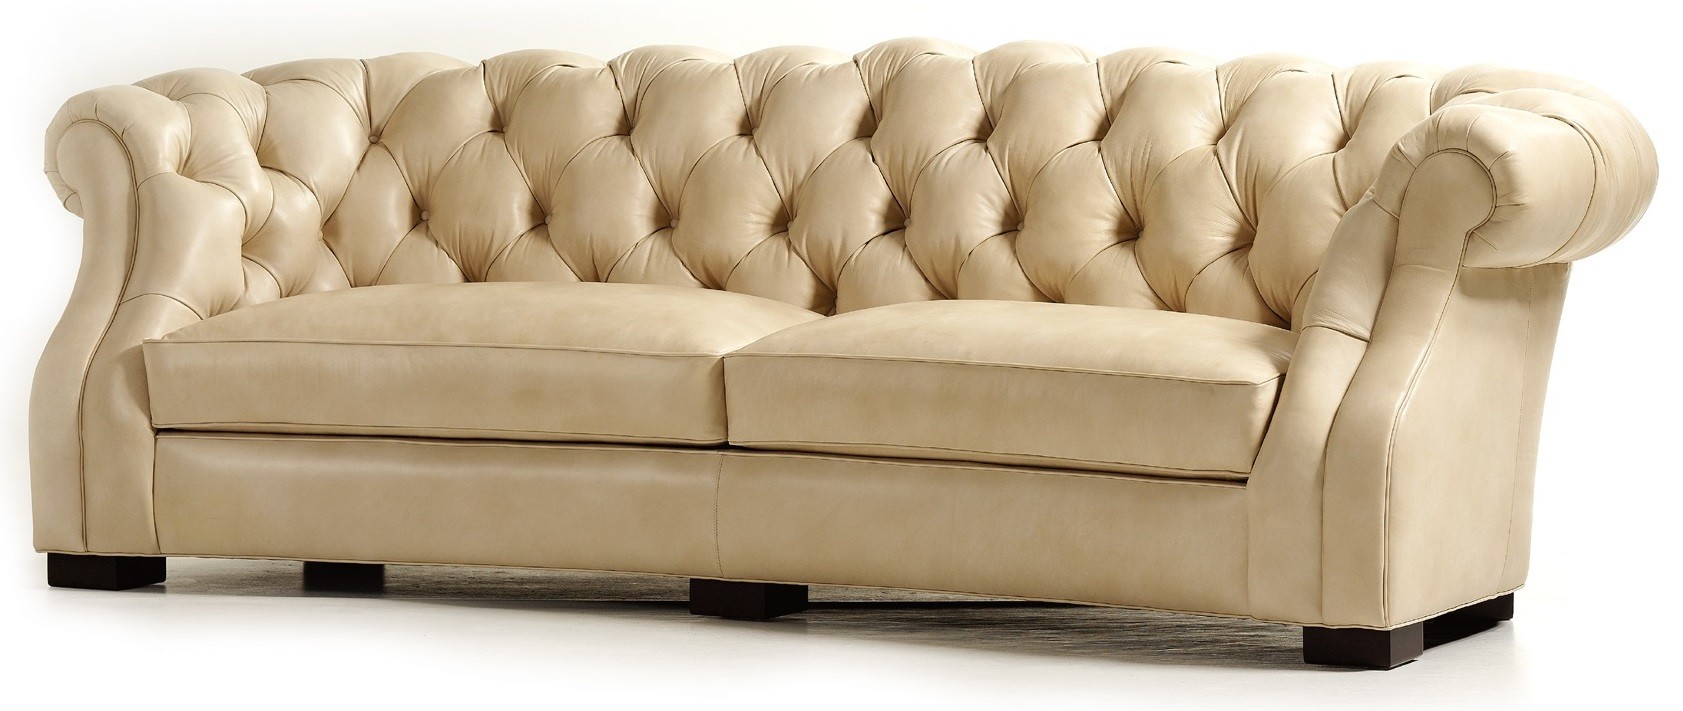 SOFA, COUCH & LOVESEAT Gorgeous Cloud on Earth Leather Sofa